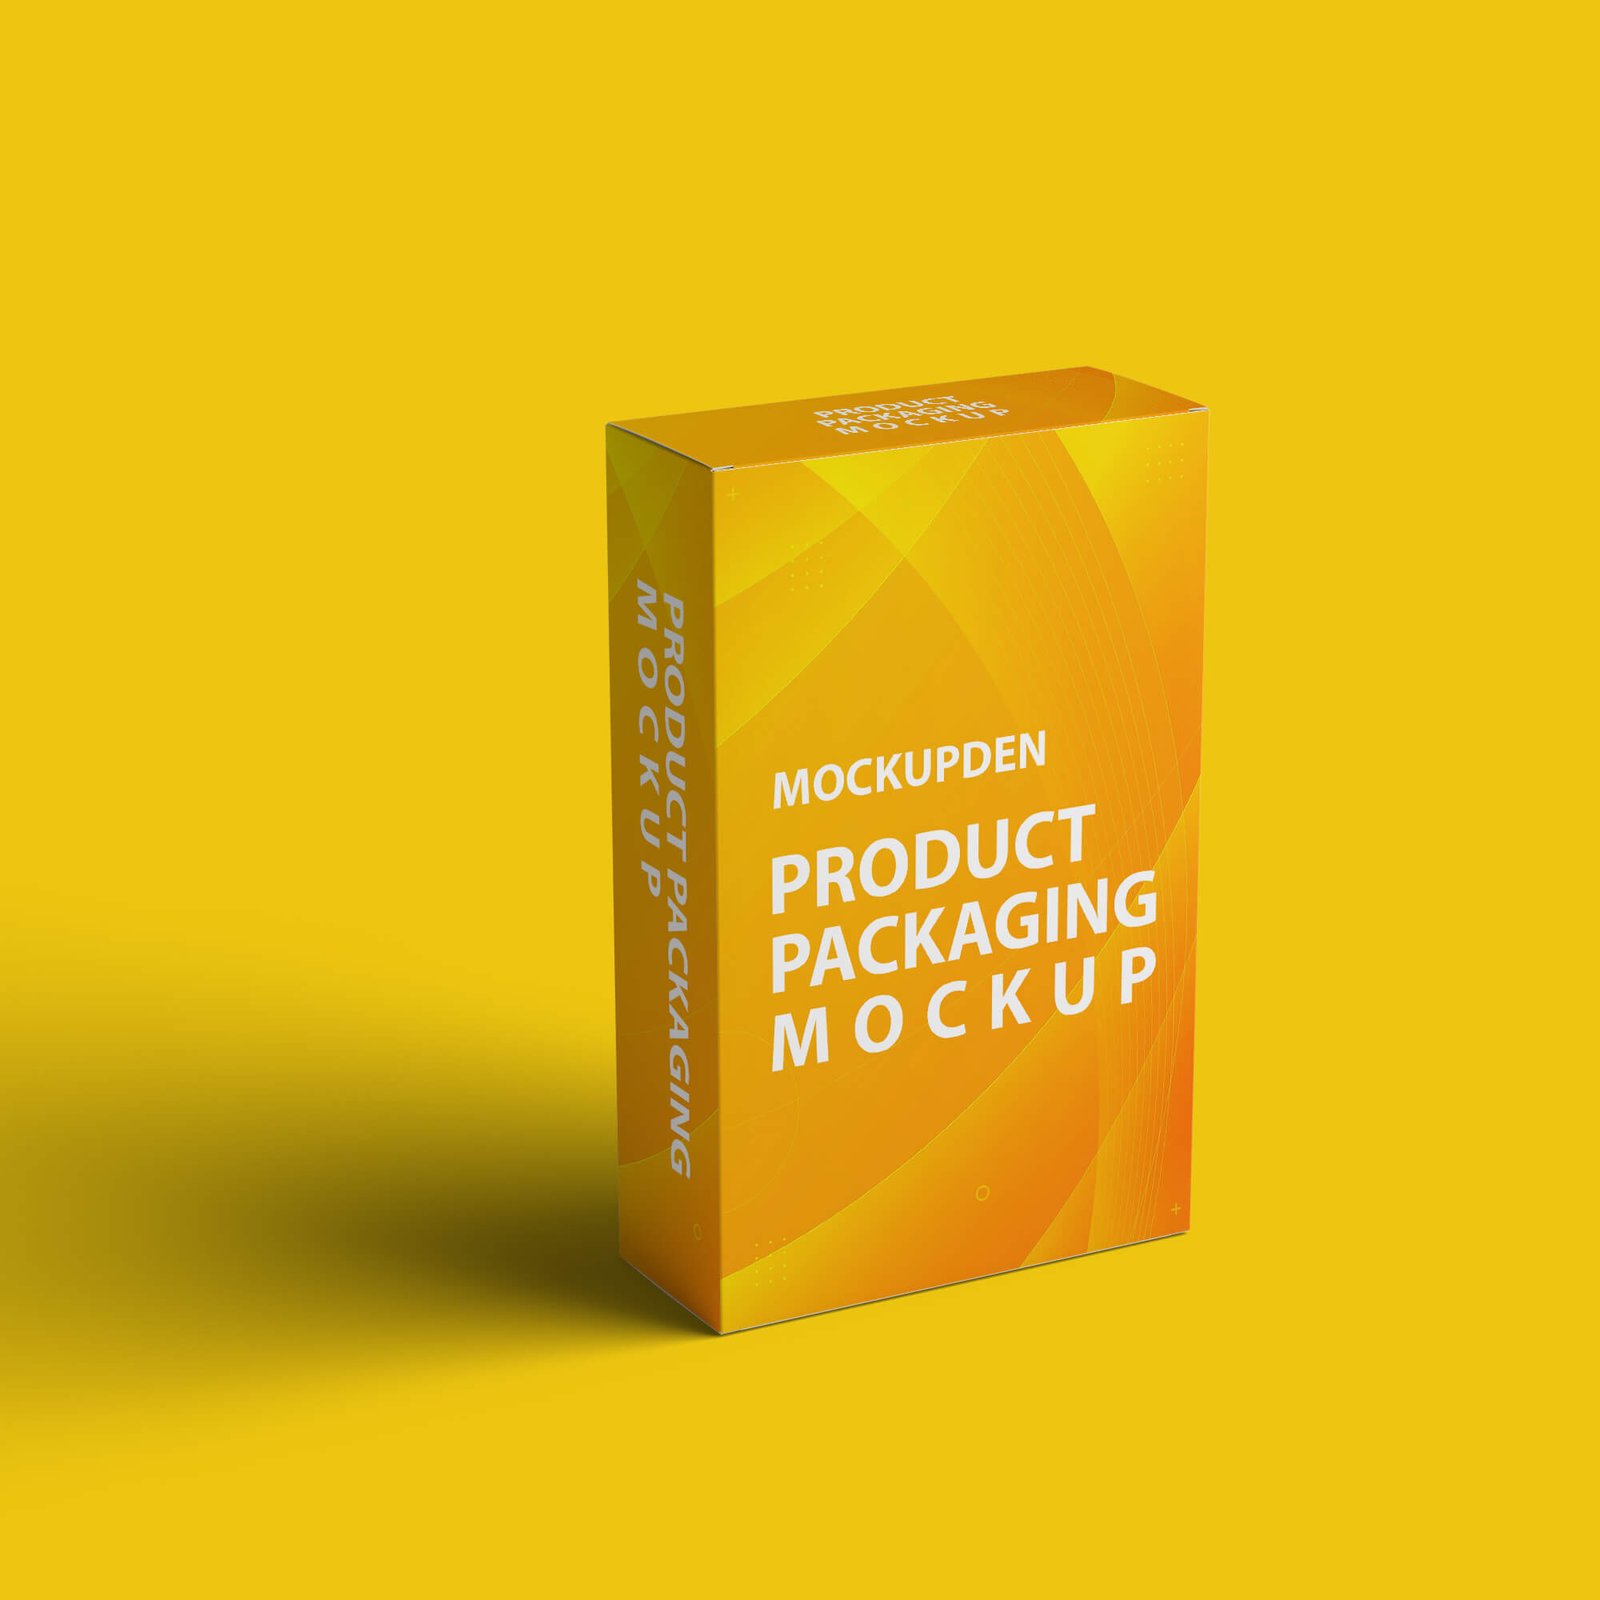 Design Free Product Packaging Mockup PSD Template